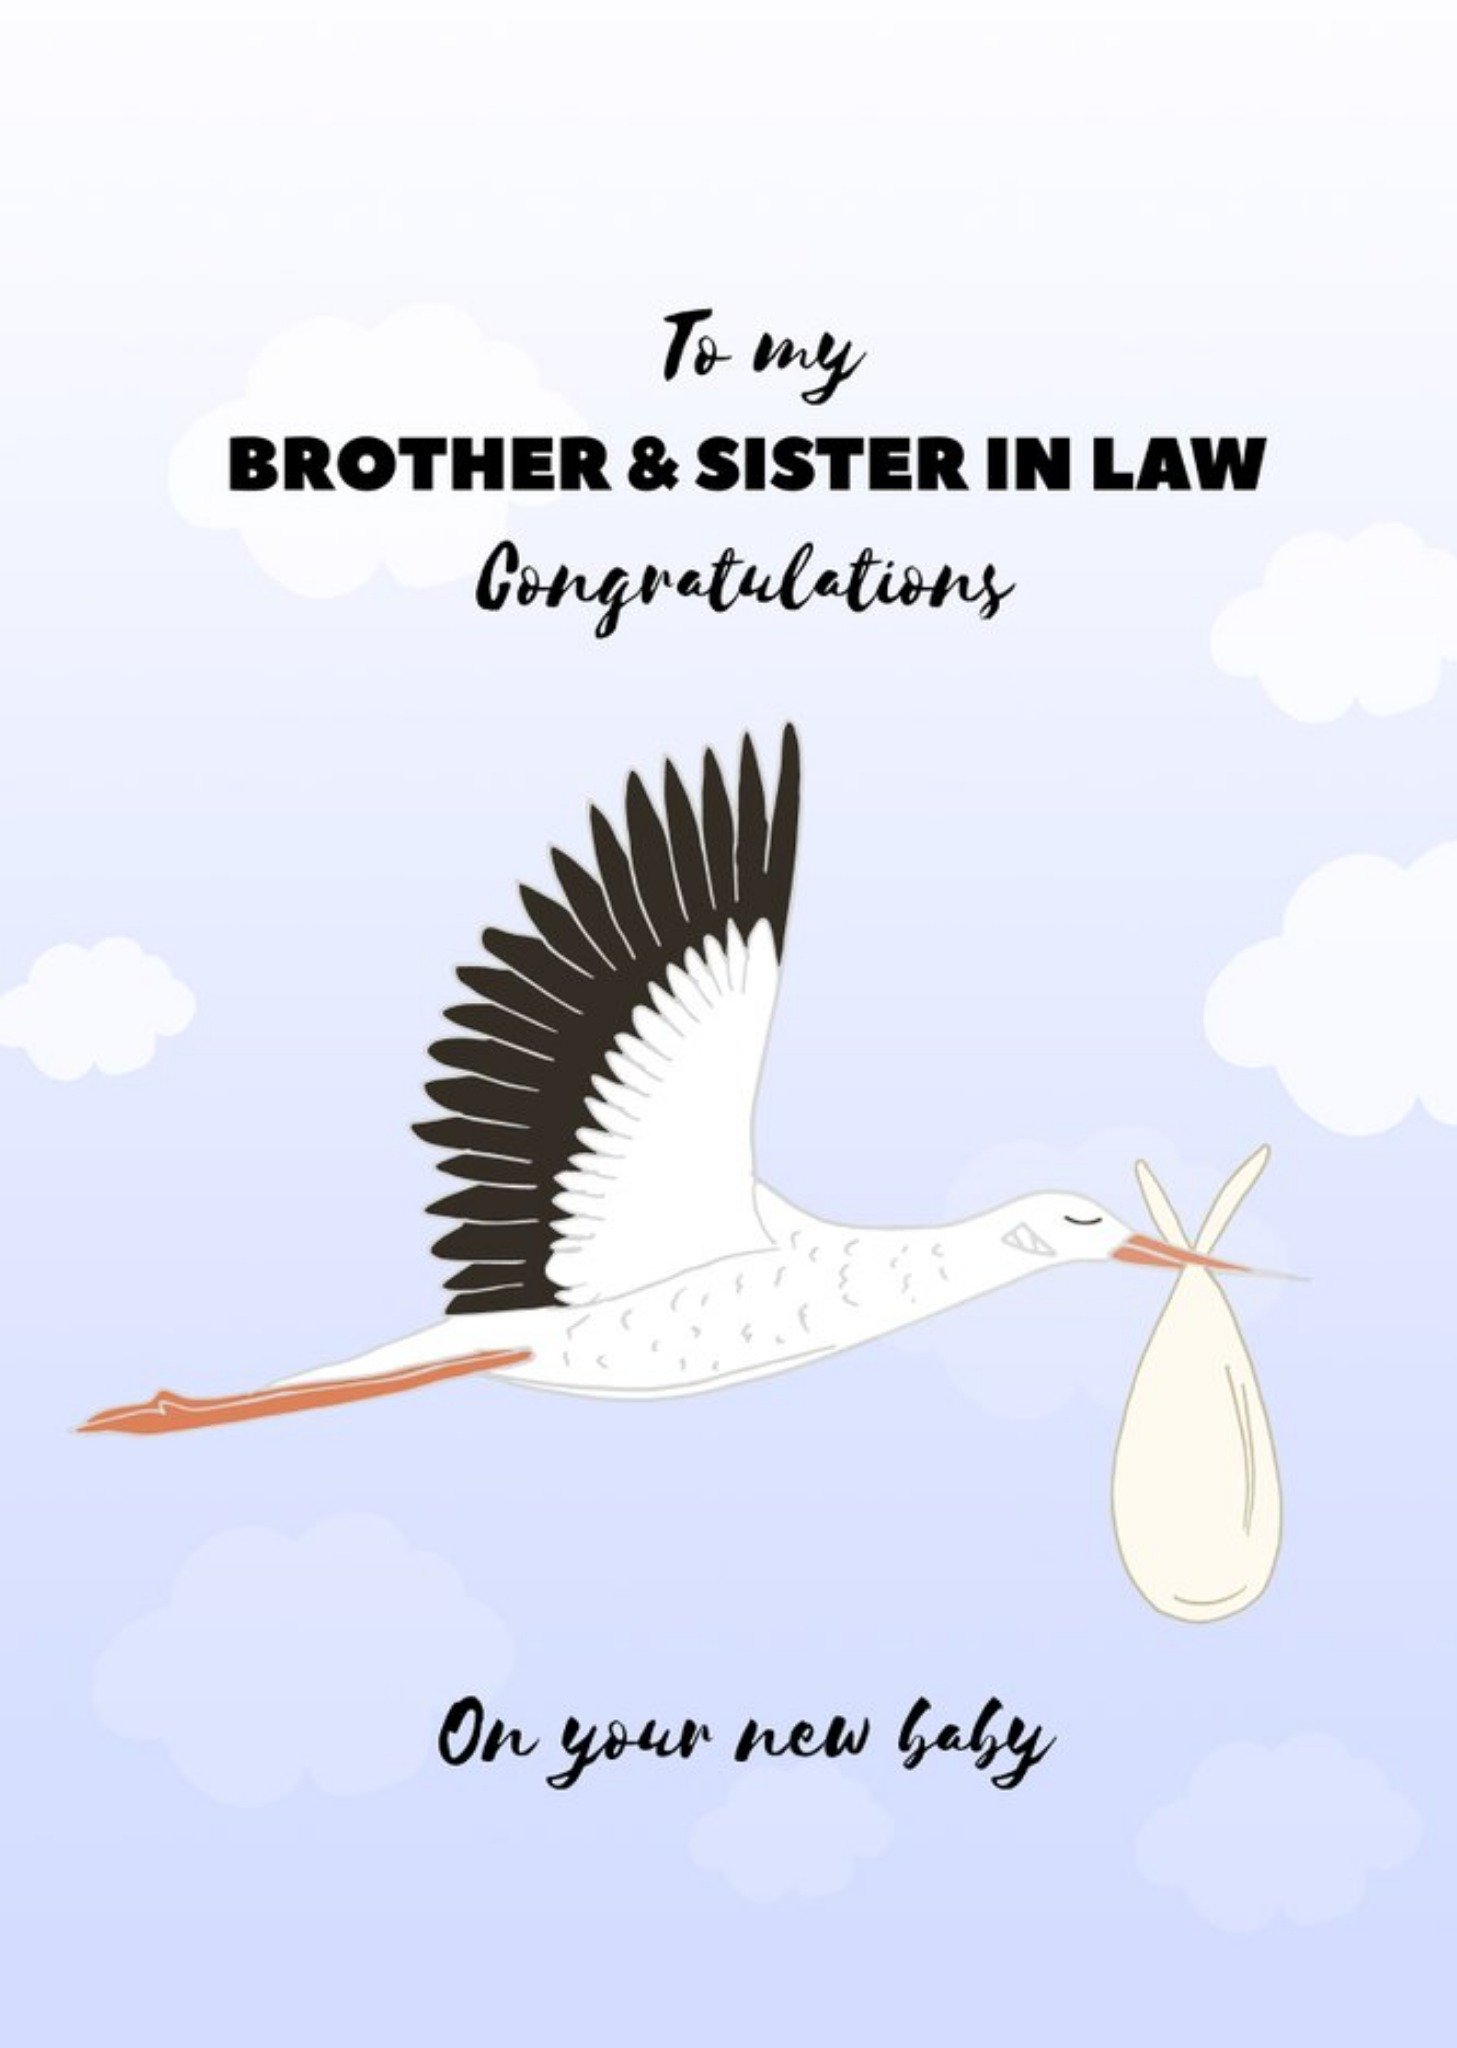 Moonpig Pearl And Ivy Illustrated Stork Brother & Sister-In-Law New Baby Congratulations Card Ecard